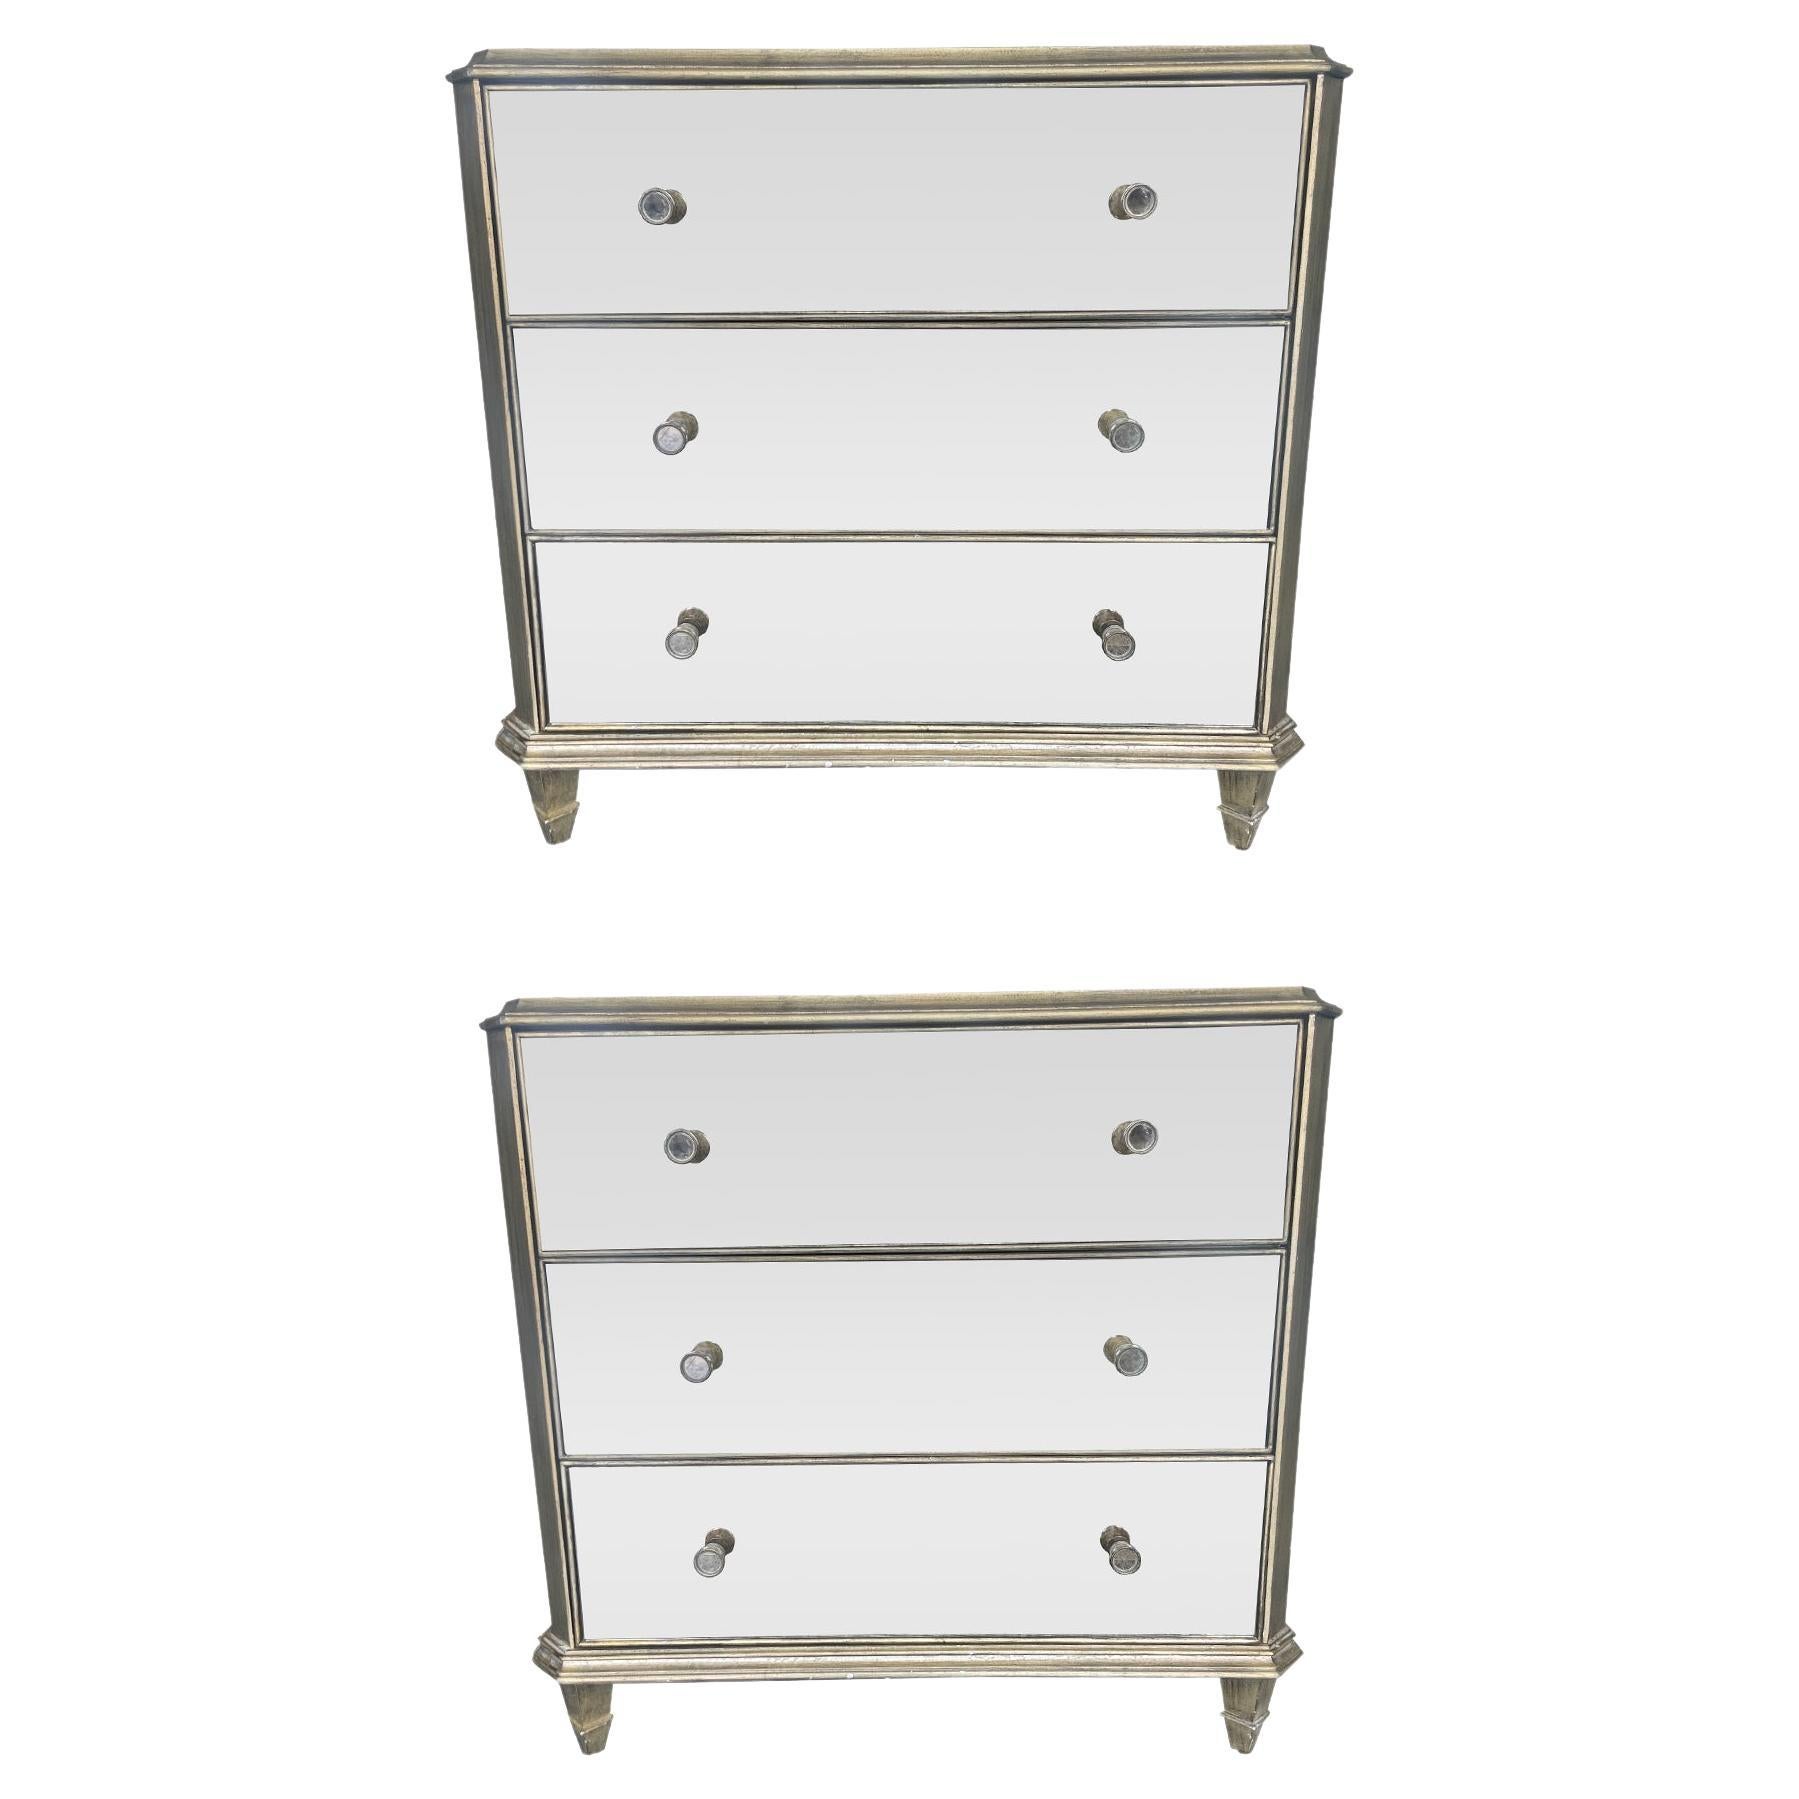 Set of Two Mirrored Glass Three Drawer Nightstands or Chests